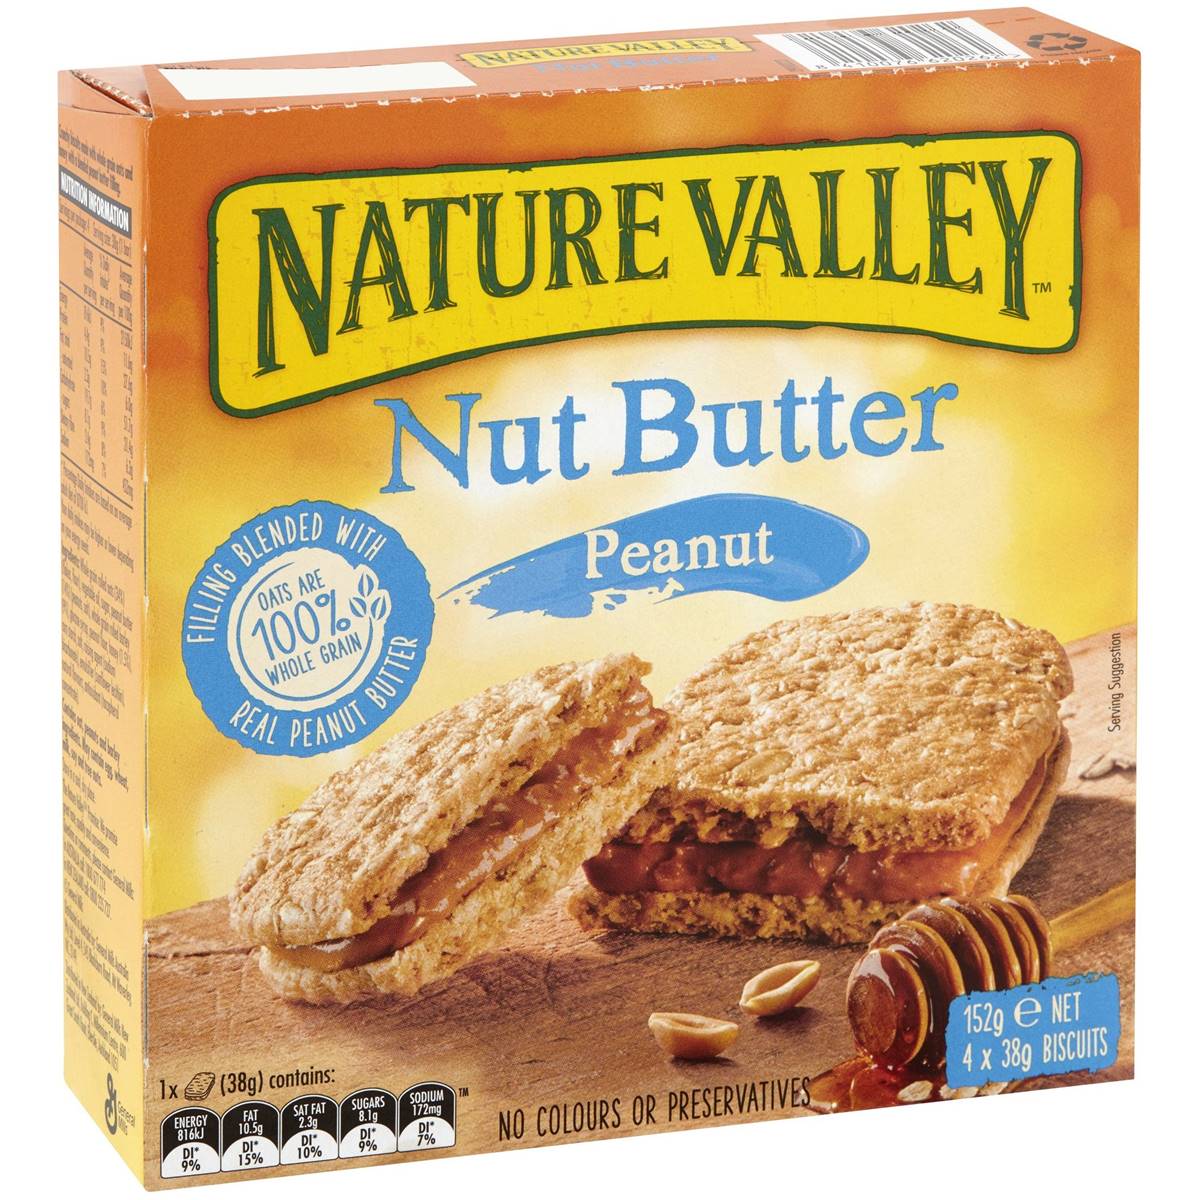 Calories in Nature Valley Nut Butter Peanut